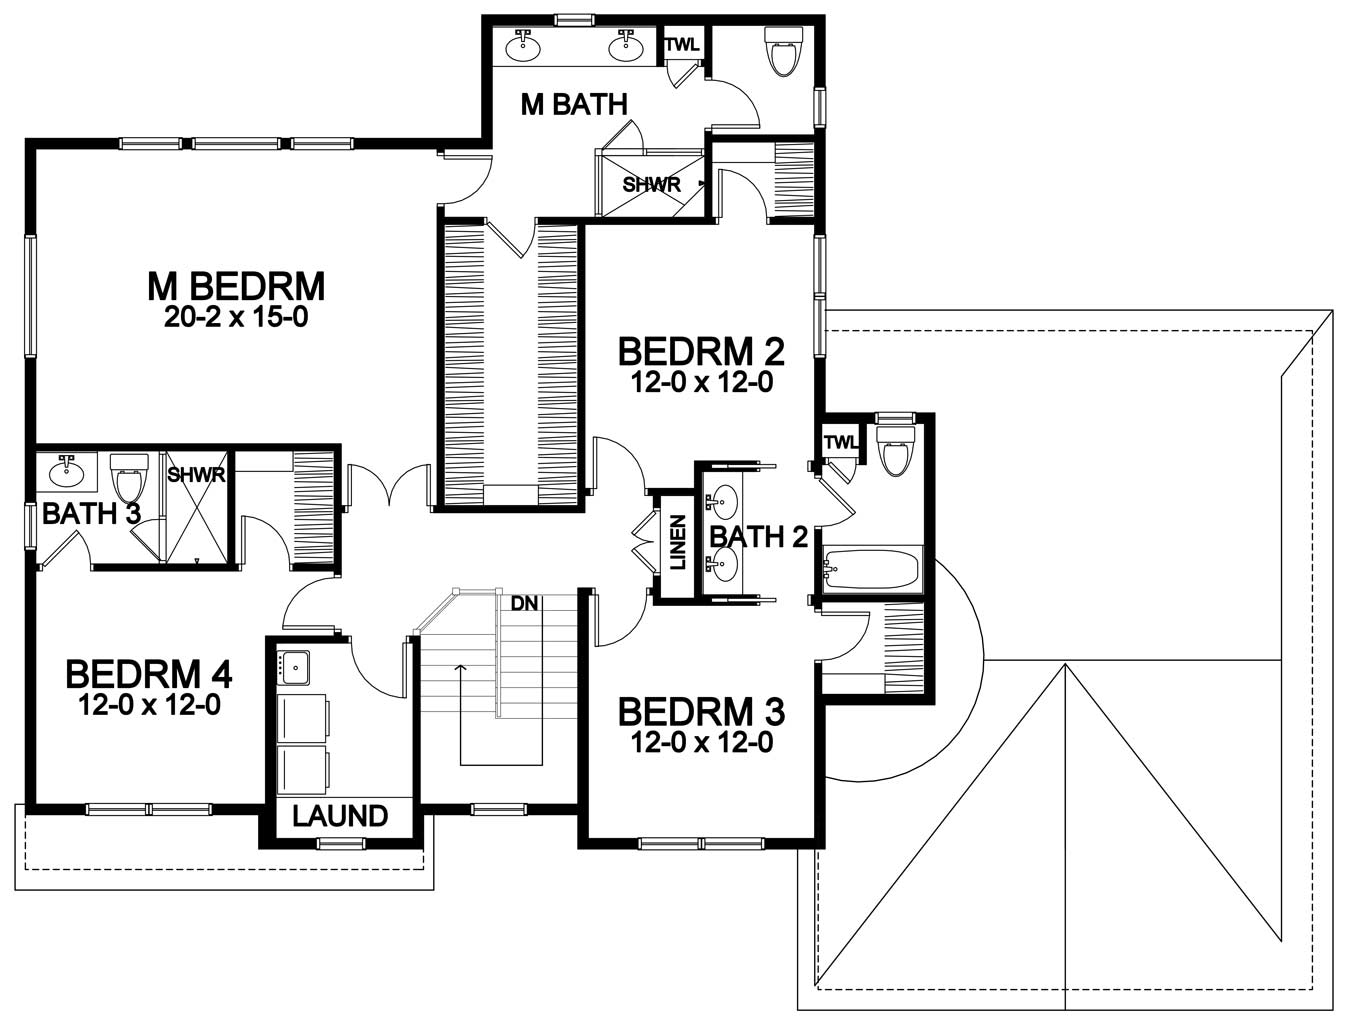 huge master suite and second floor laundry